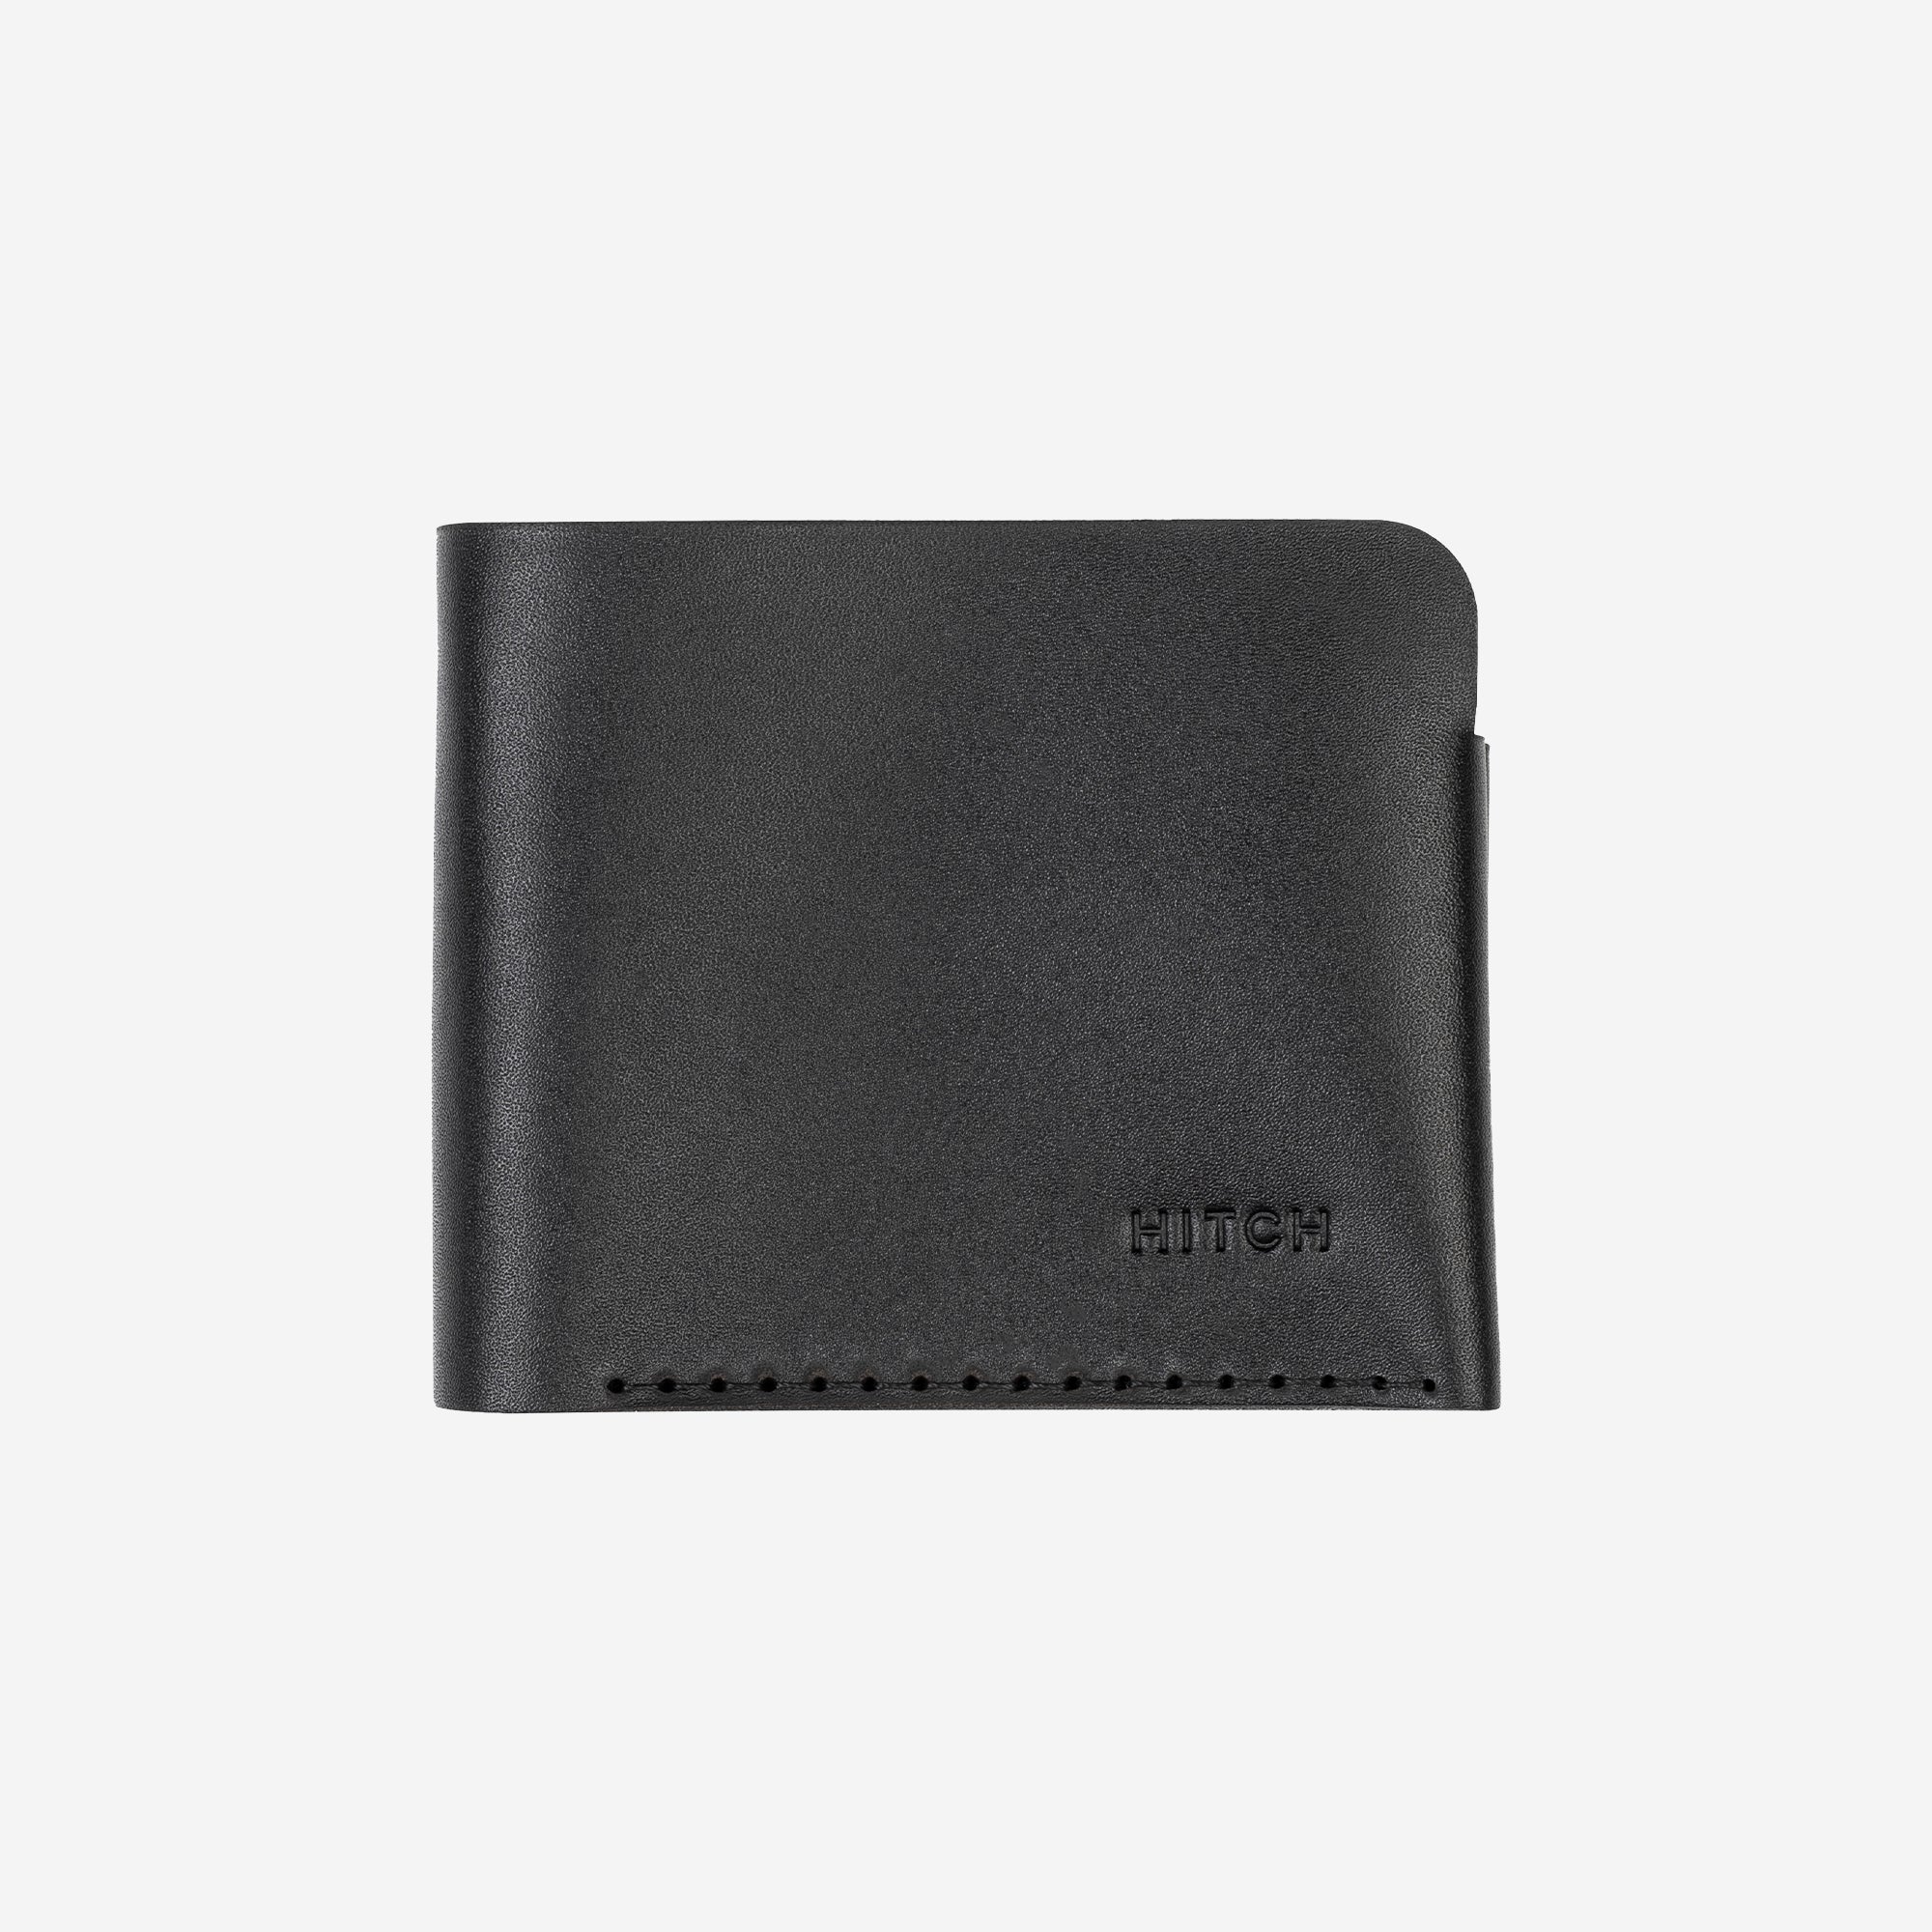 Black leather bifold wallet with embossed logo "HITCH", isolated on white background.